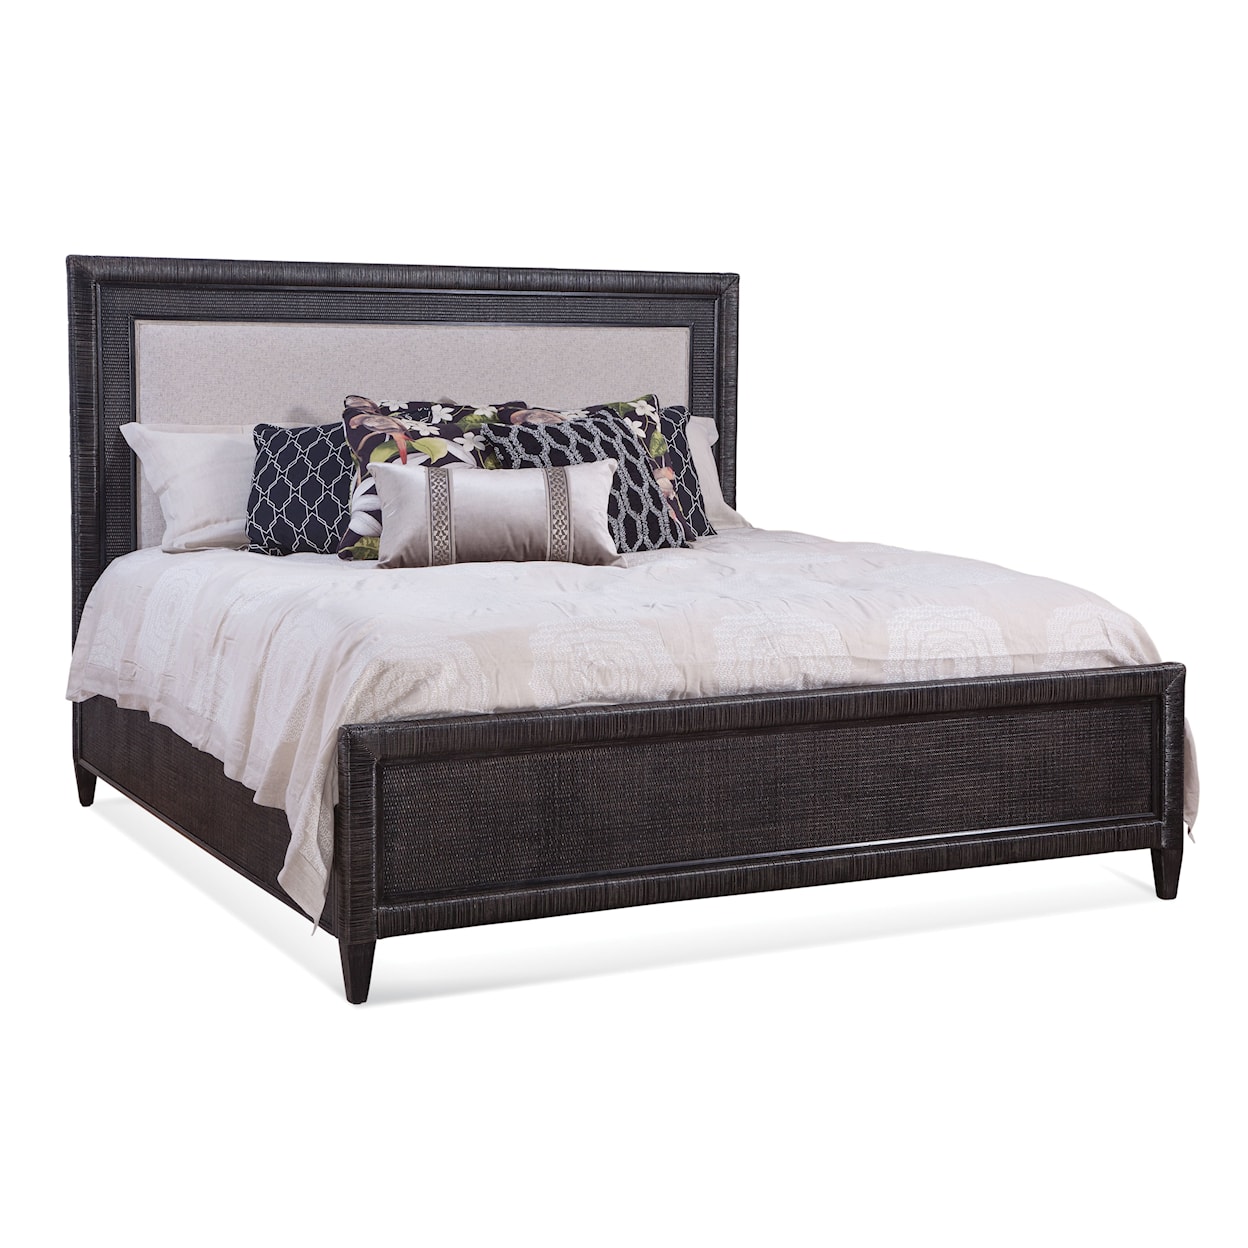 Braxton Culler Sabal Bay Queen Upholstered Panel Bed